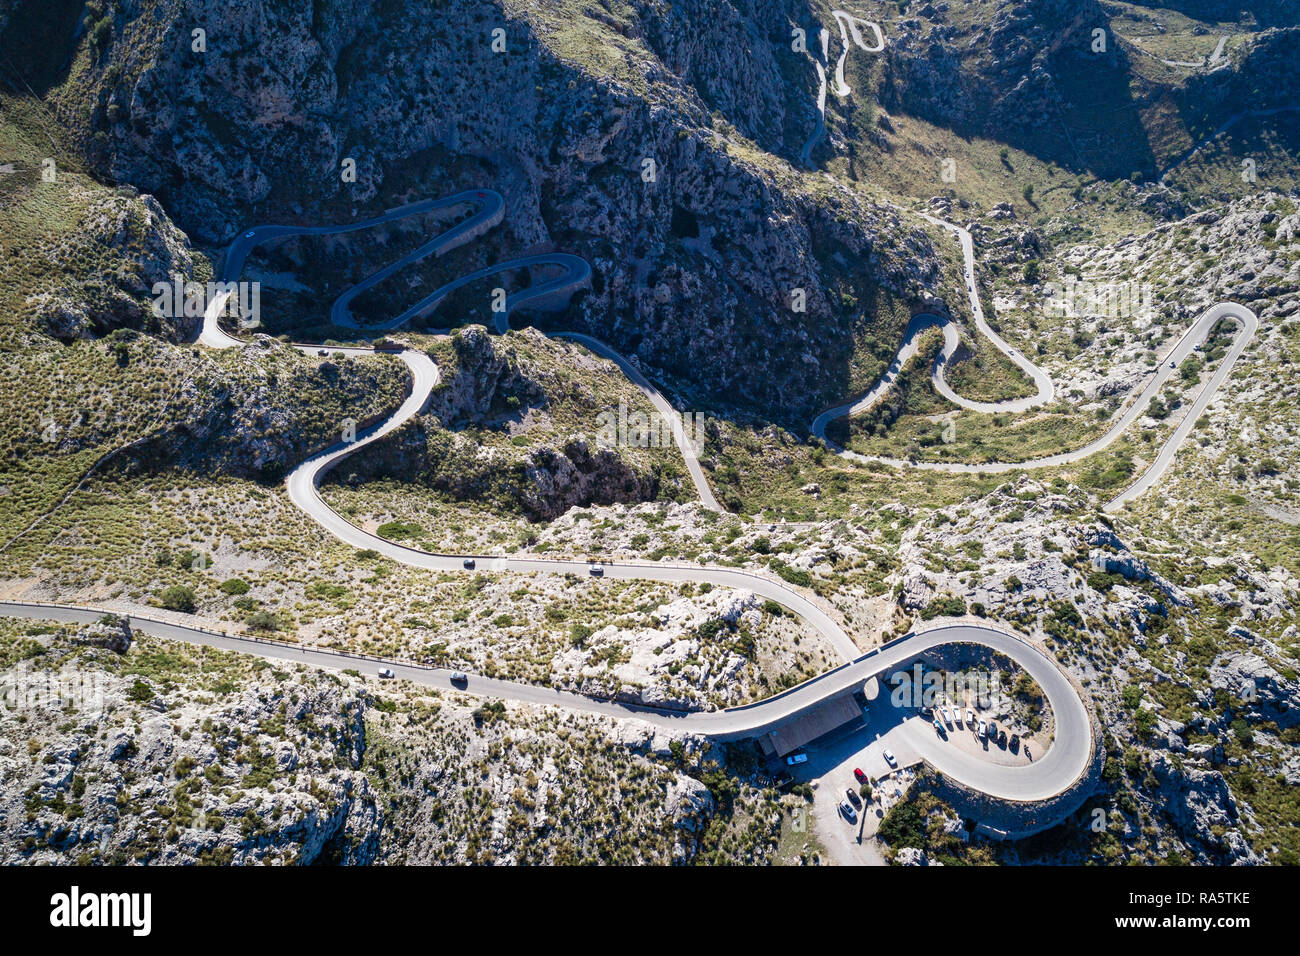 Sa Calobra Road, one of the most scenic and spectacular roads in the world, Mallorca island, Spain Stock Photo